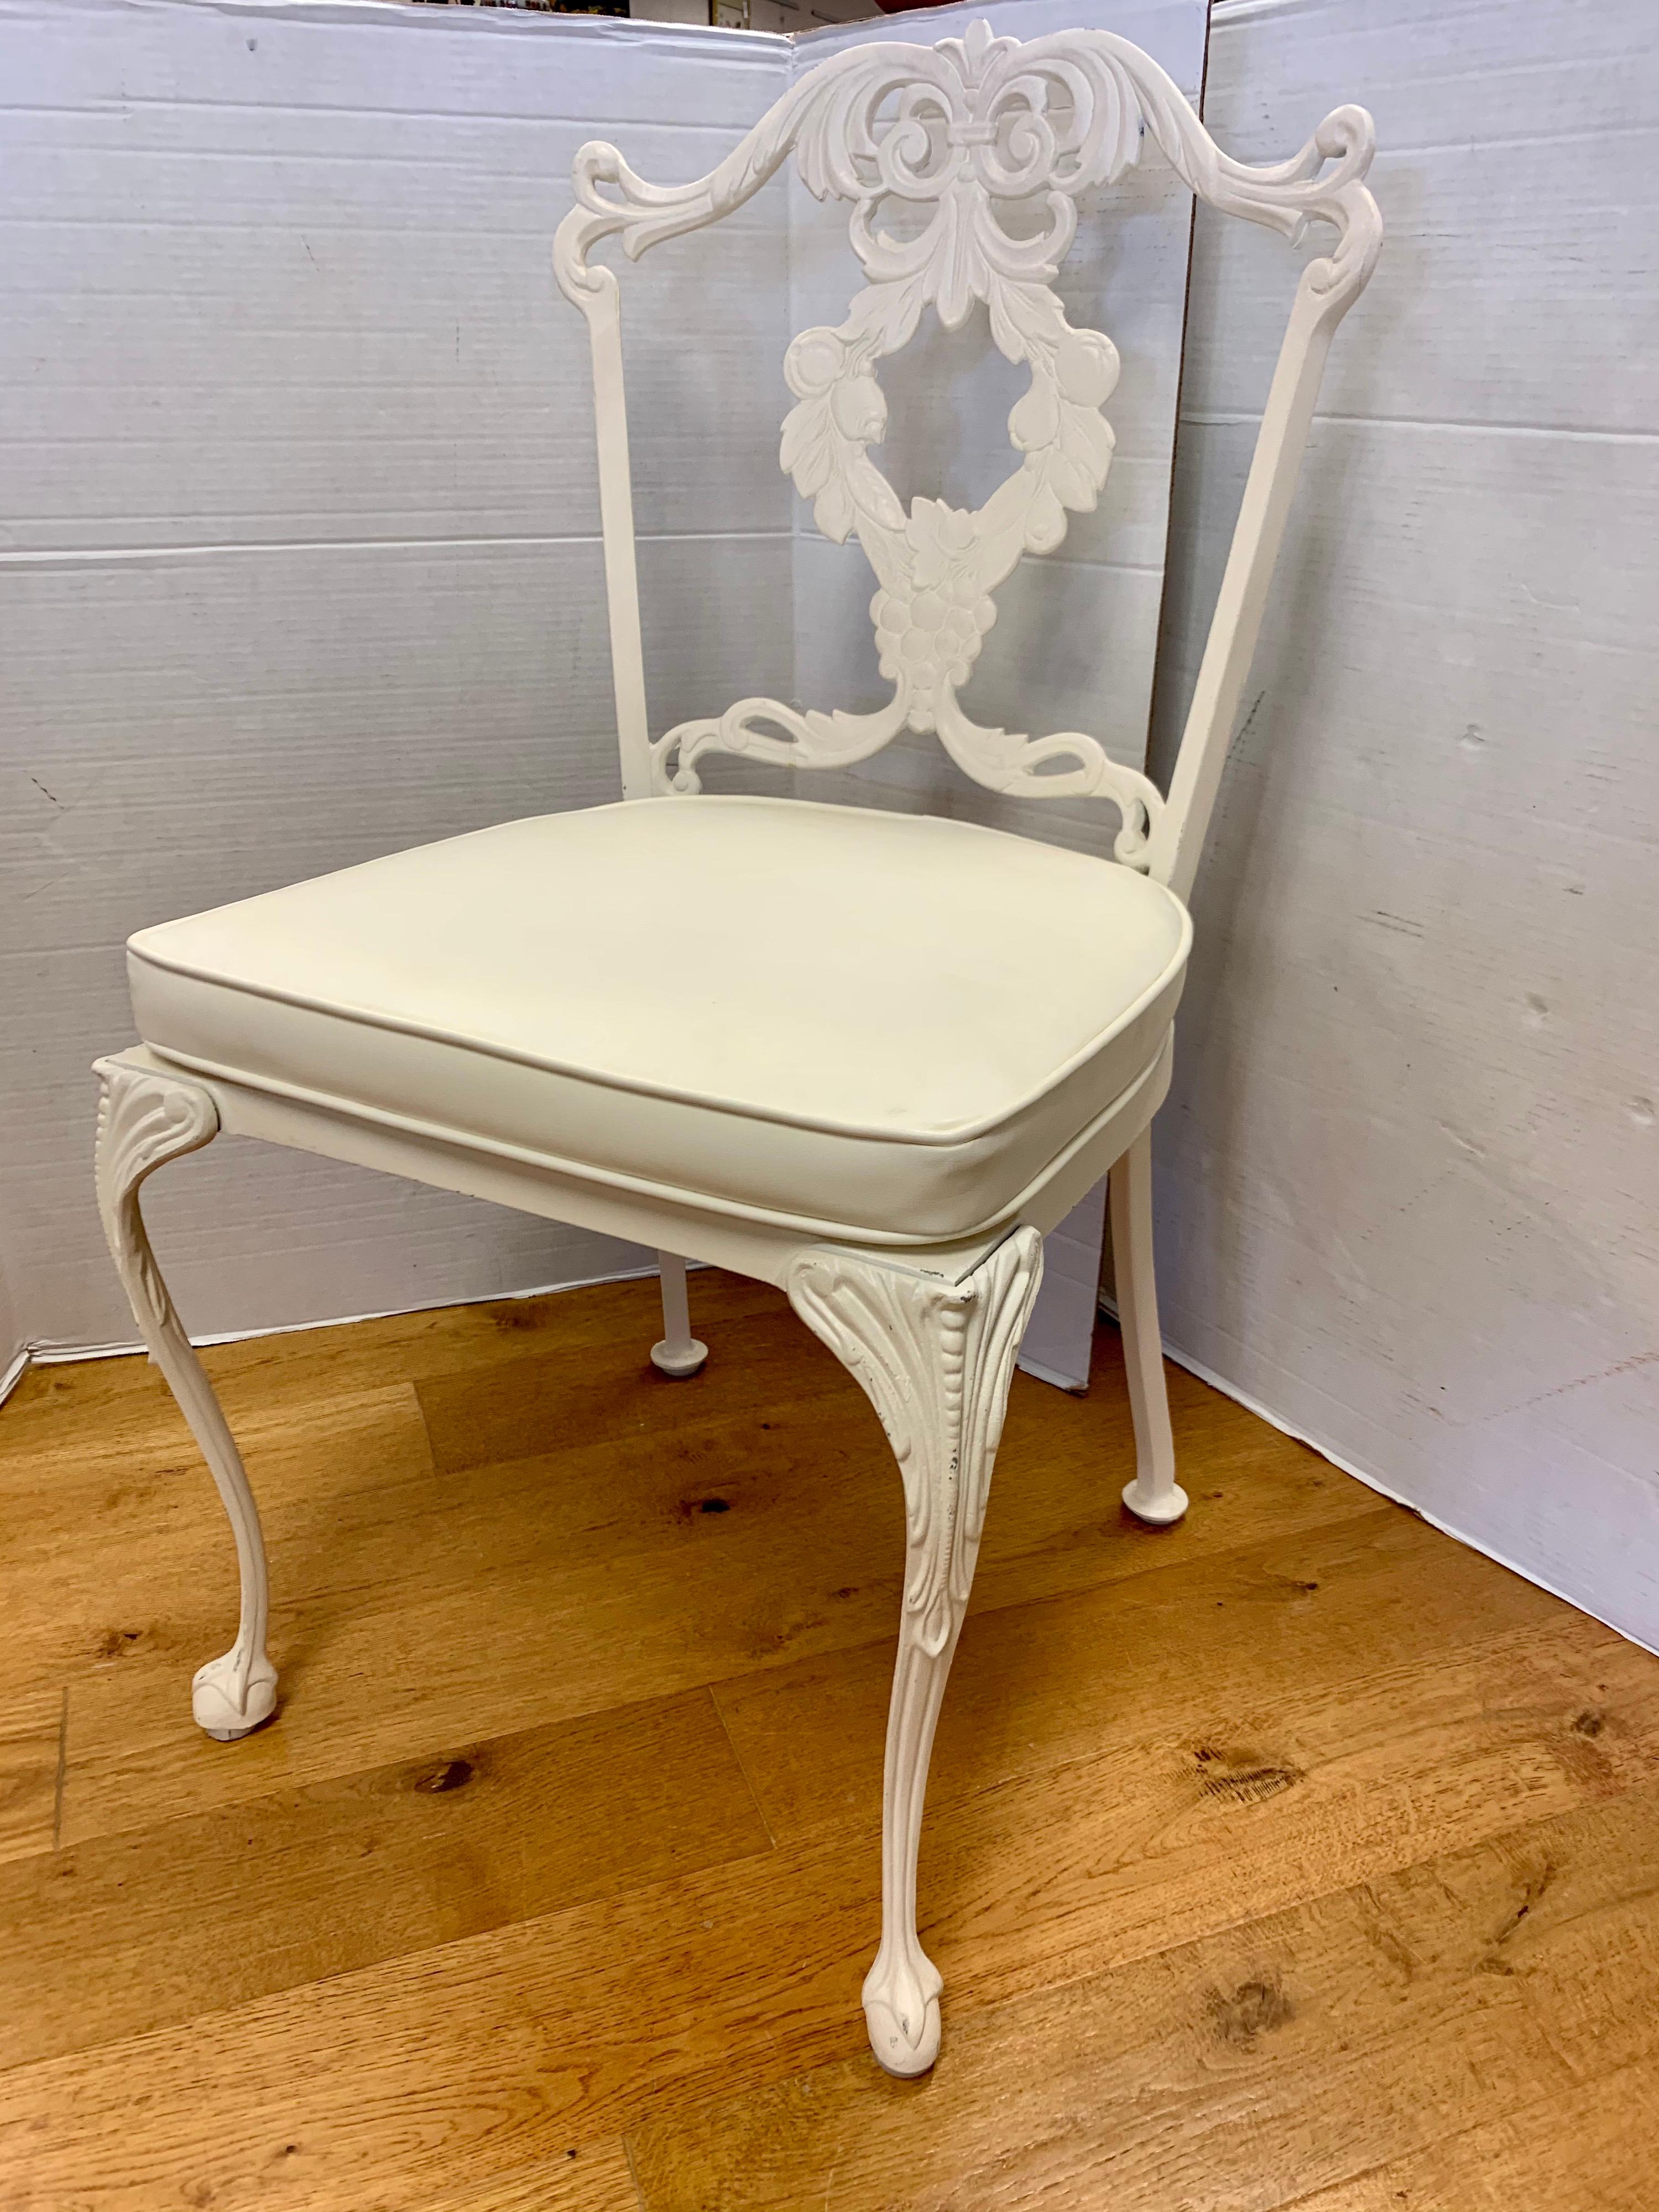 Set of four cast aluminum and white enameled French regency style dining chairs. Fresh white enamel over finely cast aluminum for which Molla was renowned. Ultra rare.